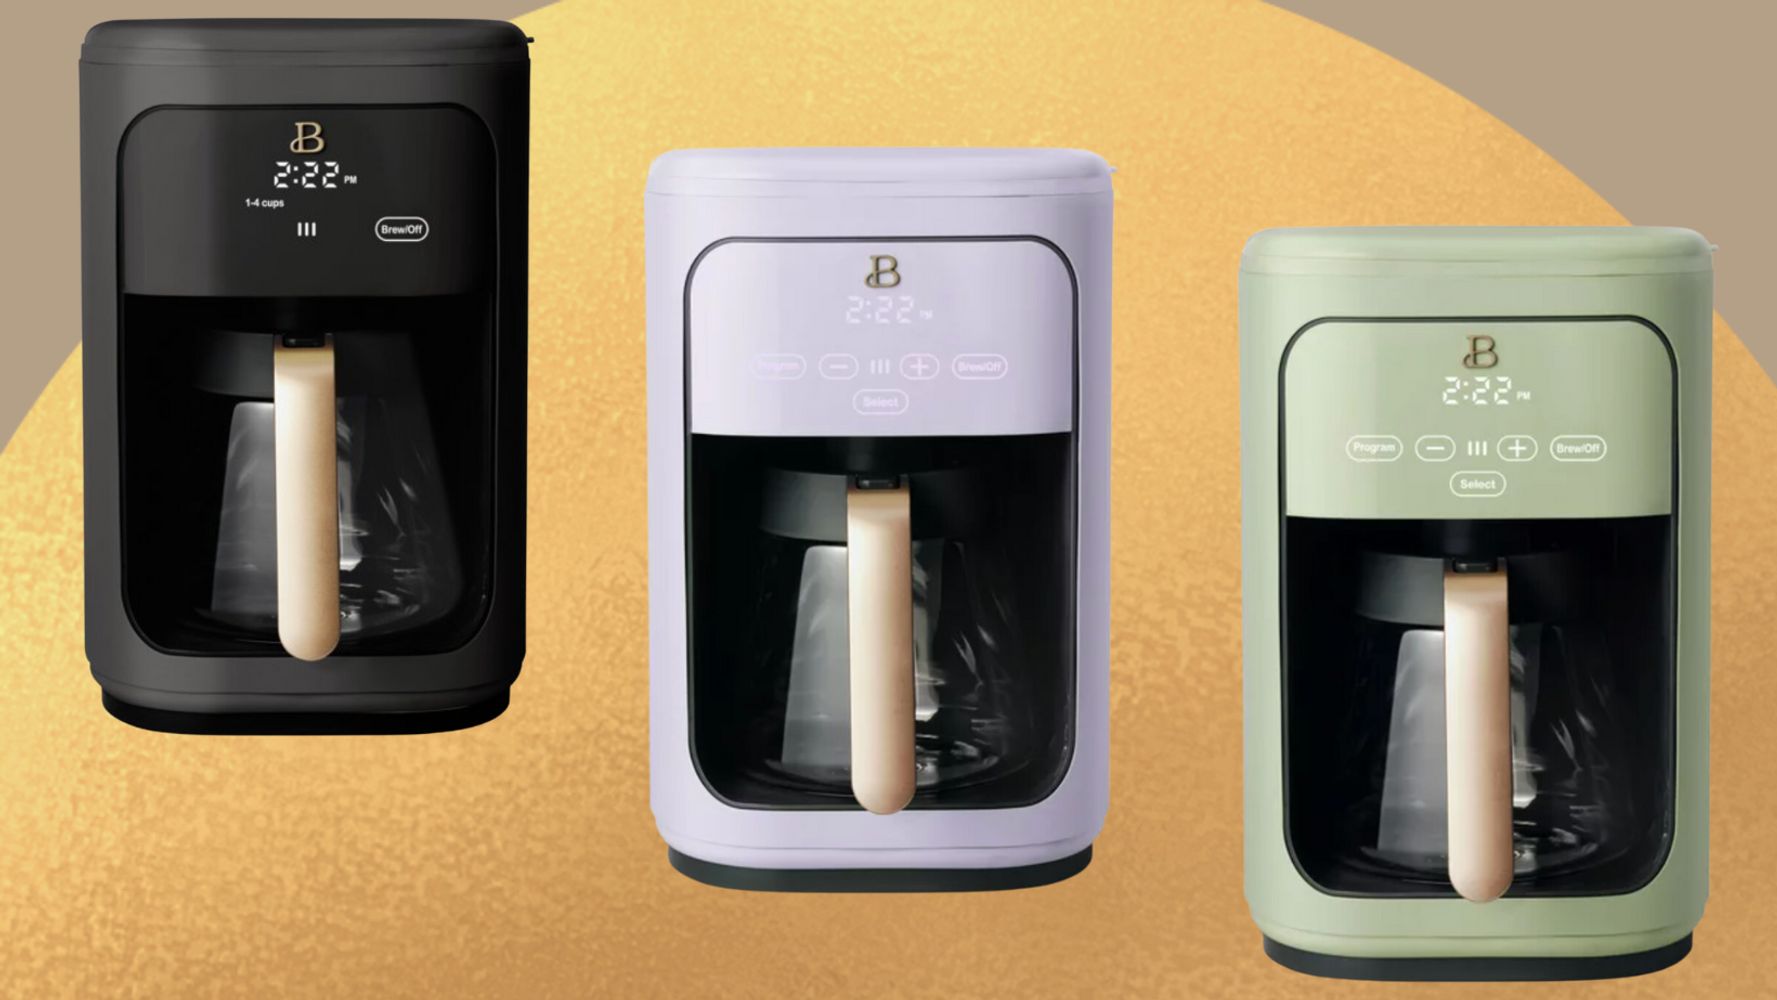 Drew Barrymore's Beautiful 14-cup coffee maker is back in stock at Walmart